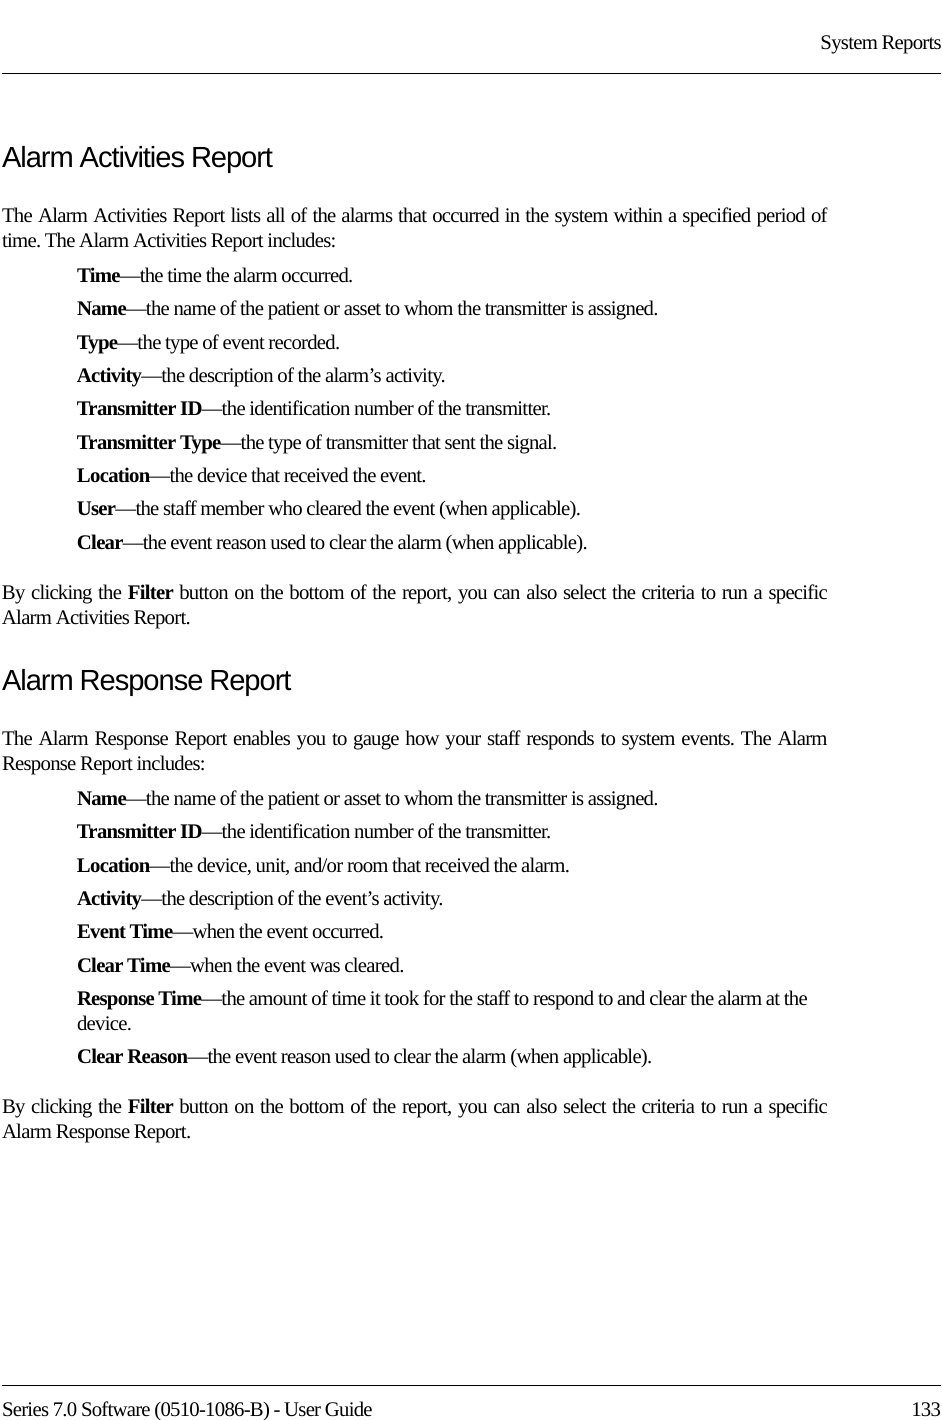 Series 7.0 Software (0510-1086-B) - User Guide  133System ReportsAlarm Activities ReportThe Alarm Activities Report lists all of the alarms that occurred in the system within a specified period of time. The Alarm Activities Report includes:Time—the time the alarm occurred.Name—the name of the patient or asset to whom the transmitter is assigned. Type—the type of event recorded.Activity—the description of the alarm’s activity.Transmitter ID—the identification number of the transmitter.Transmitter Type—the type of transmitter that sent the signal.Location—the device that received the event.User—the staff member who cleared the event (when applicable).Clear—the event reason used to clear the alarm (when applicable).By clicking the Filter button on the bottom of the report, you can also select the criteria to run a specific Alarm Activities Report.Alarm Response ReportThe Alarm Response Report enables you to gauge how your staff responds to system events. The Alarm Response Report includes:Name—the name of the patient or asset to whom the transmitter is assigned. Transmitter ID—the identification number of the transmitter. Location—the device, unit, and/or room that received the alarm.Activity—the description of the event’s activity.Event Time—when the event occurred.Clear Time—when the event was cleared.Response Time—the amount of time it took for the staff to respond to and clear the alarm at the device.Clear Reason—the event reason used to clear the alarm (when applicable).By clicking the Filter button on the bottom of the report, you can also select the criteria to run a specific Alarm Response Report.